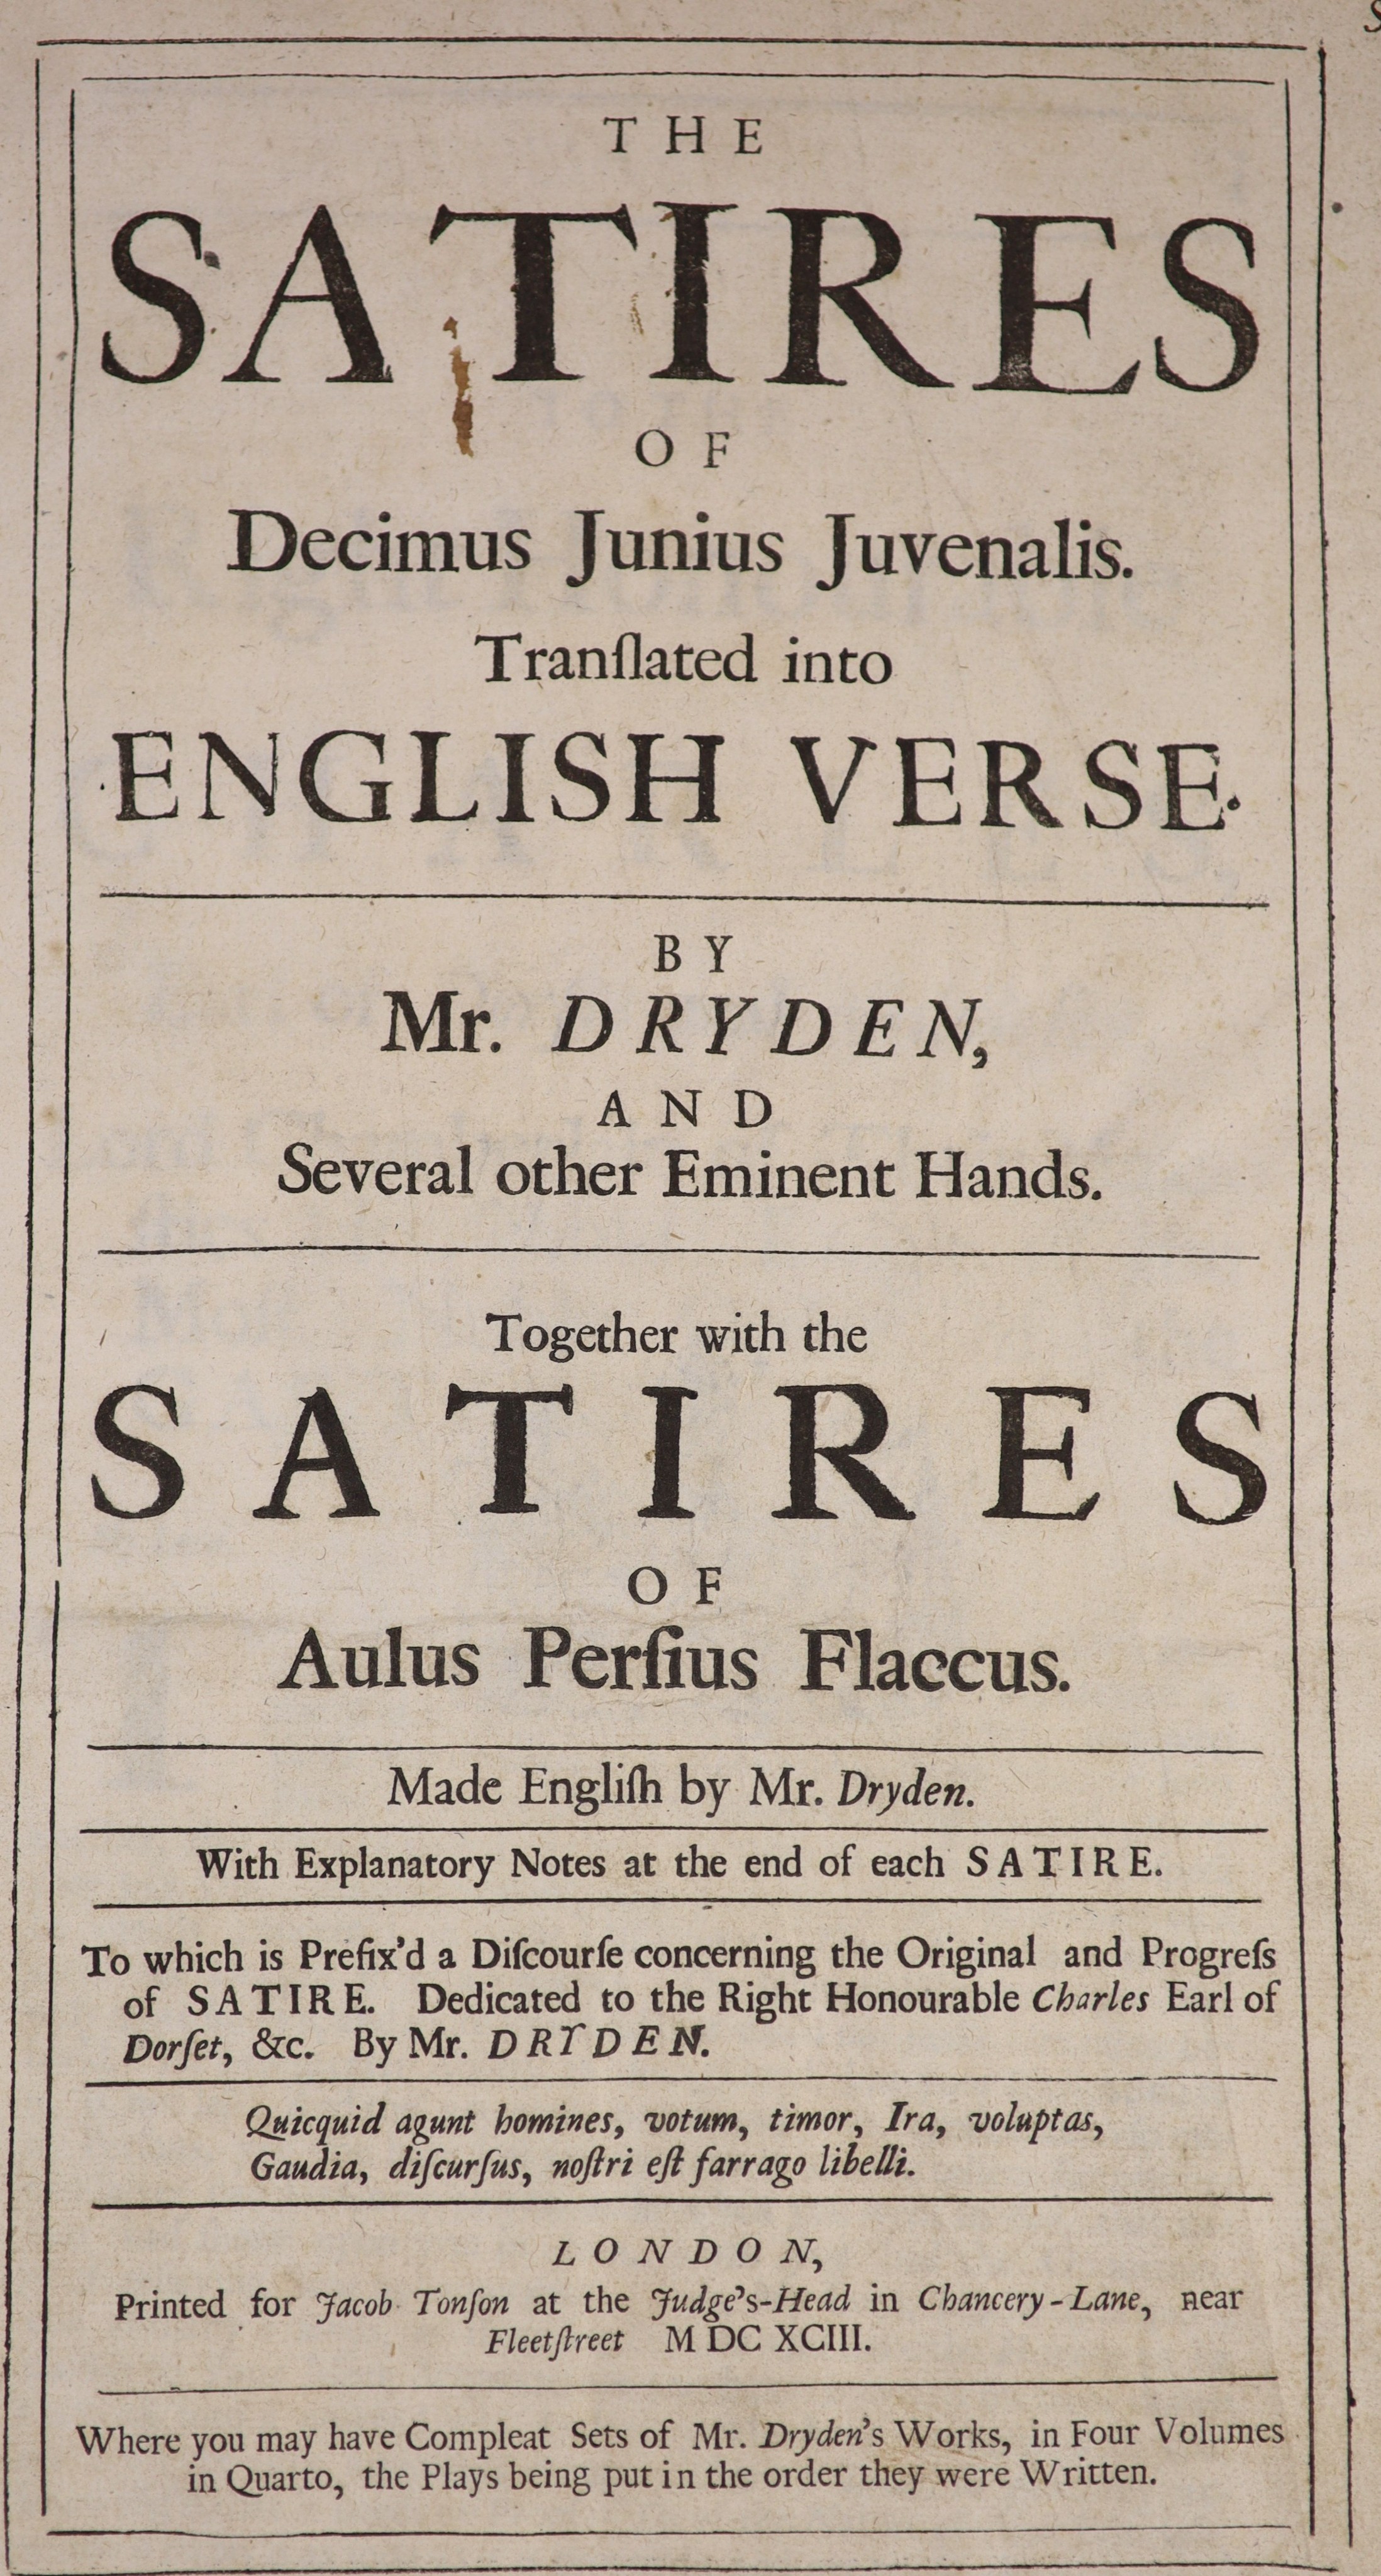 Dryden, John - The Satires of Decimus Junius Juvenalis. Translated into English Verse. By Mr Dryden ... Together with the Satires of Aulus Persius Flaccus ... contemp. panelled calf